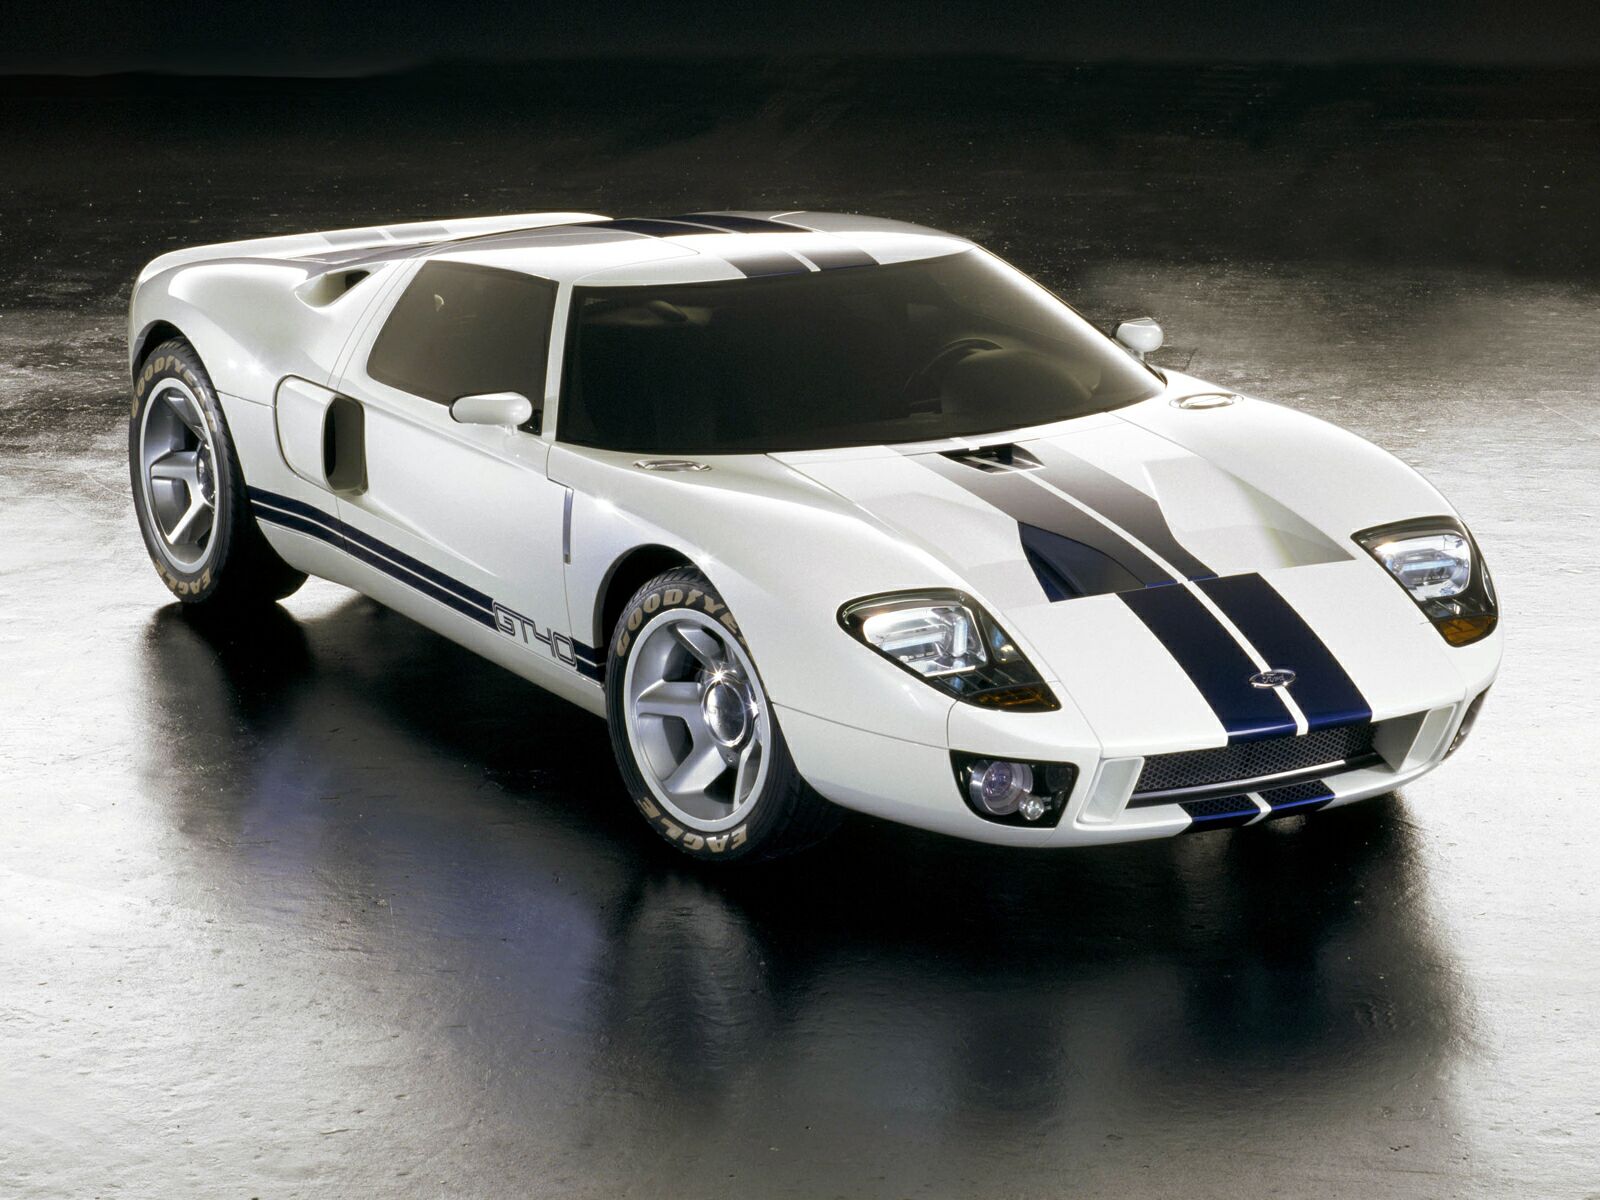 Ford Gt40 Picture 10661 Ford Photo Gallery Carsbase Com